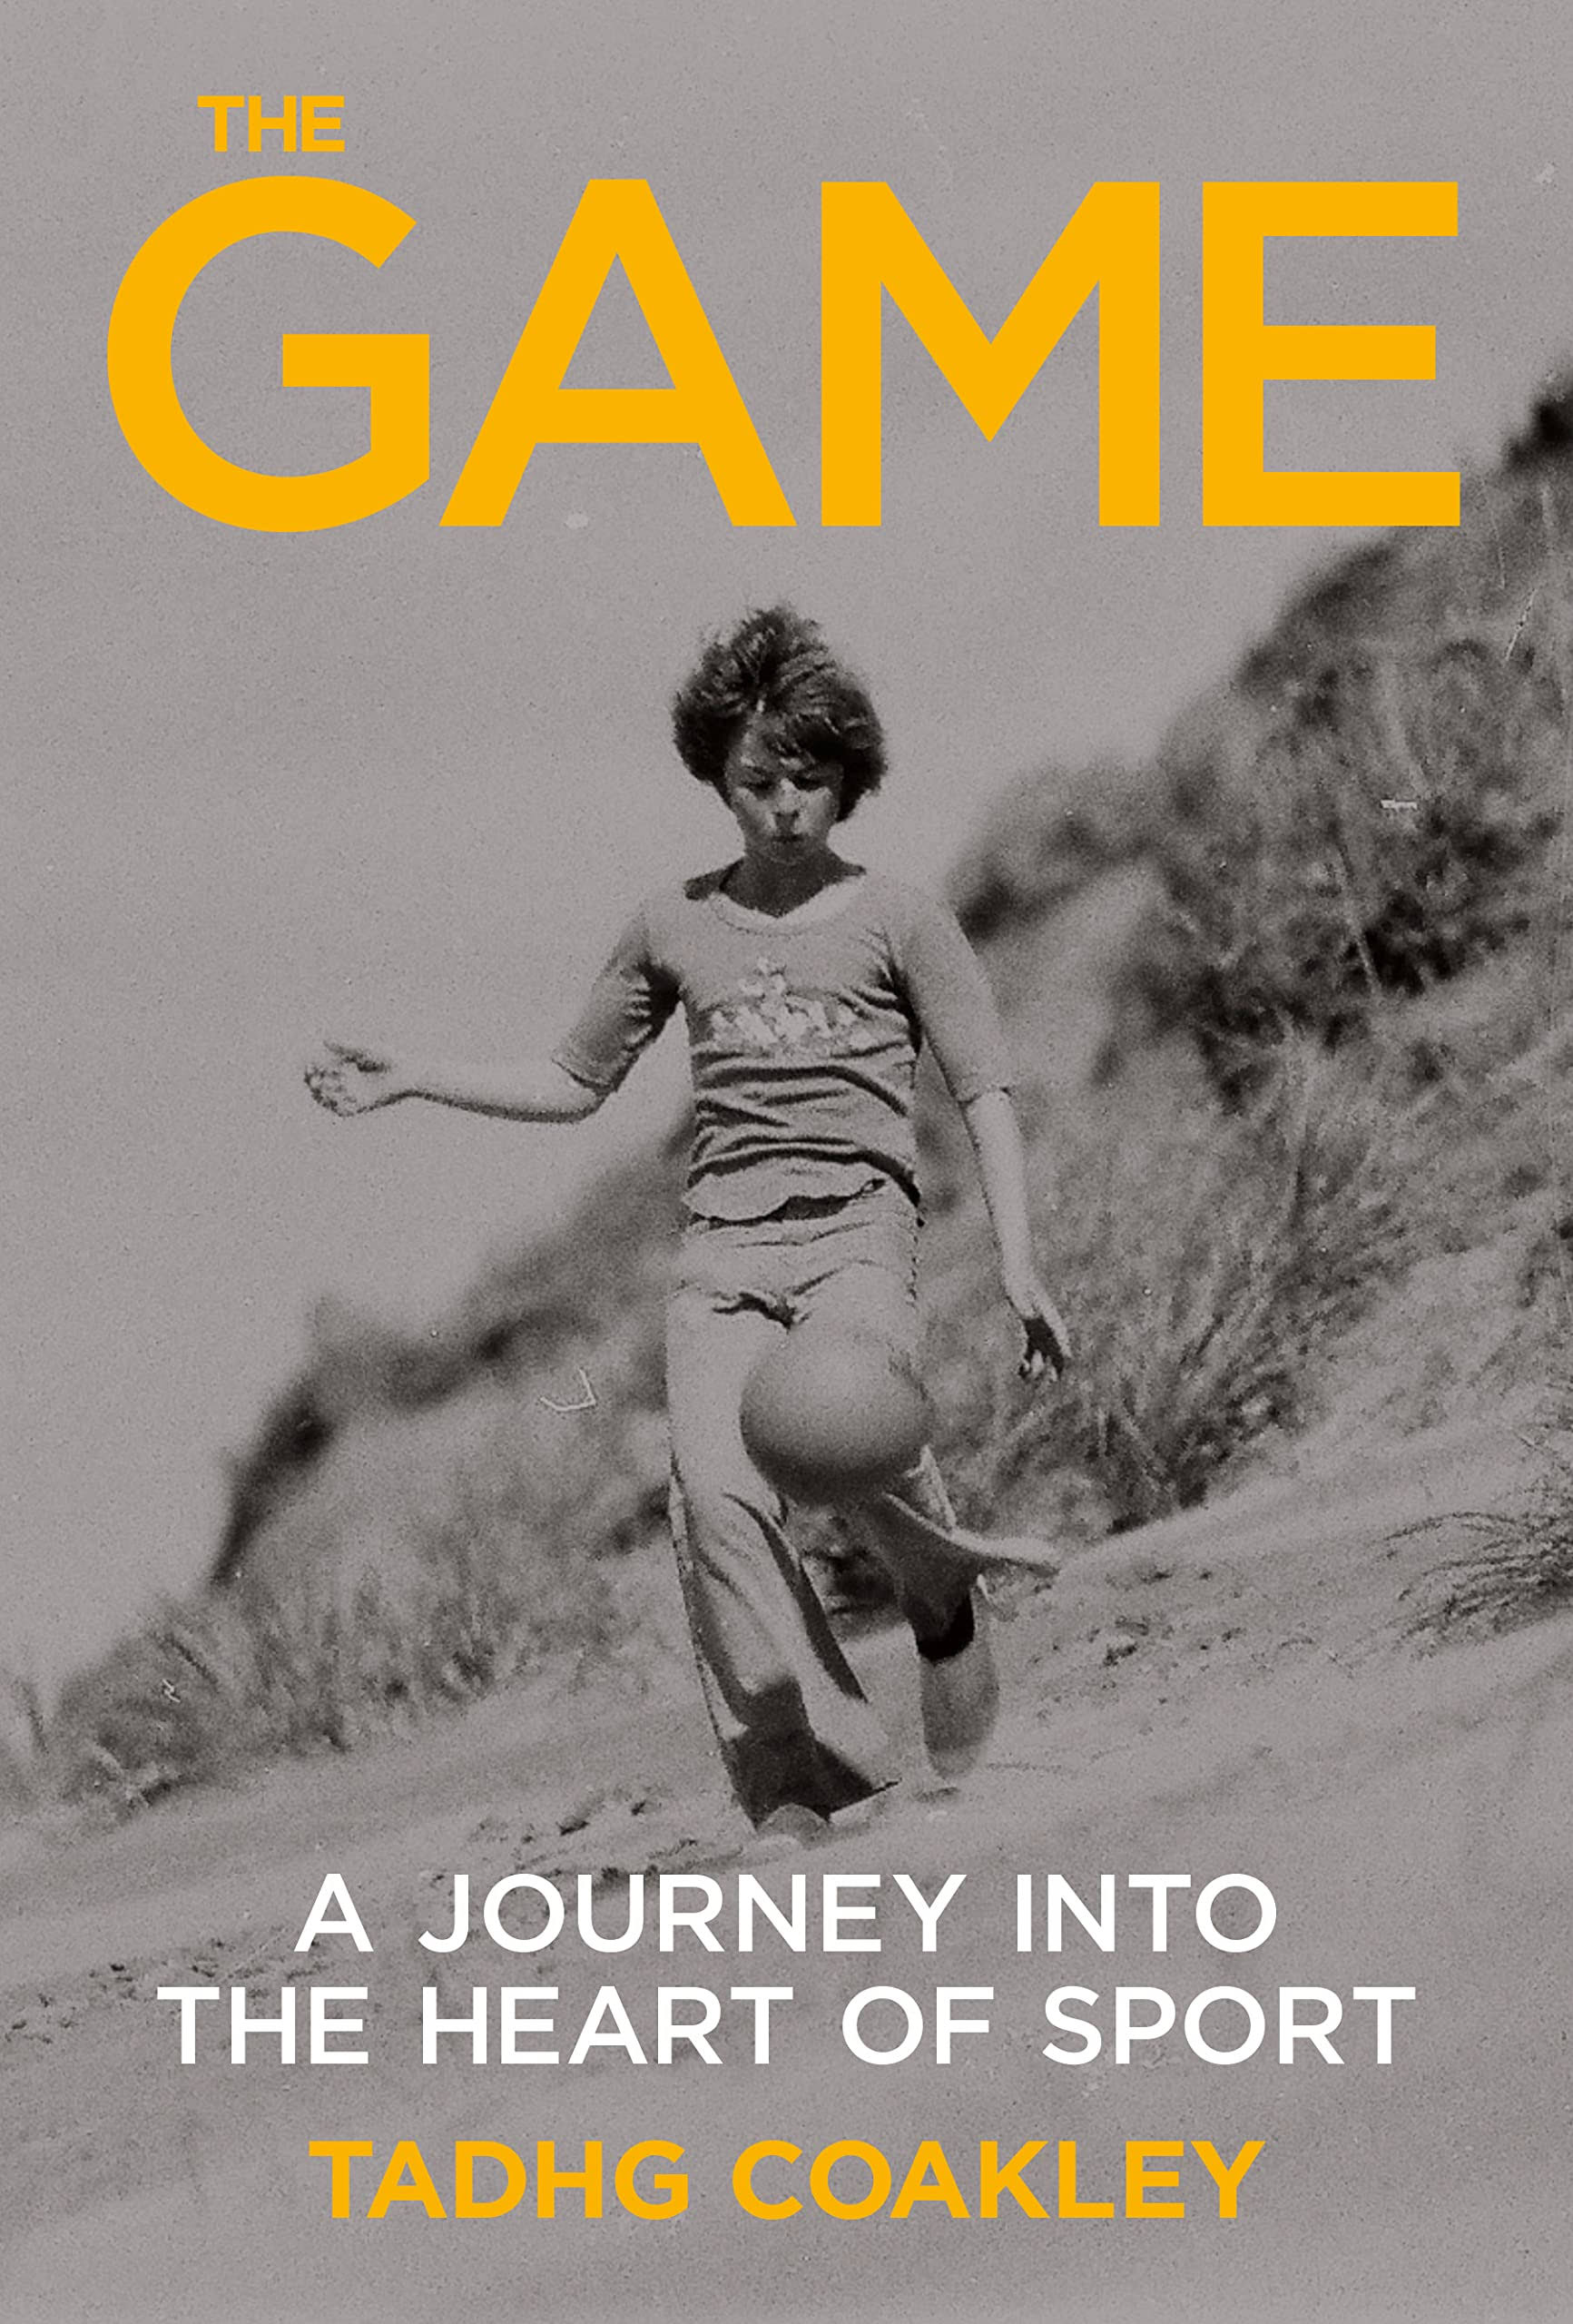 The Game: A Lifetime Inside and Outside the White Lines [Book]